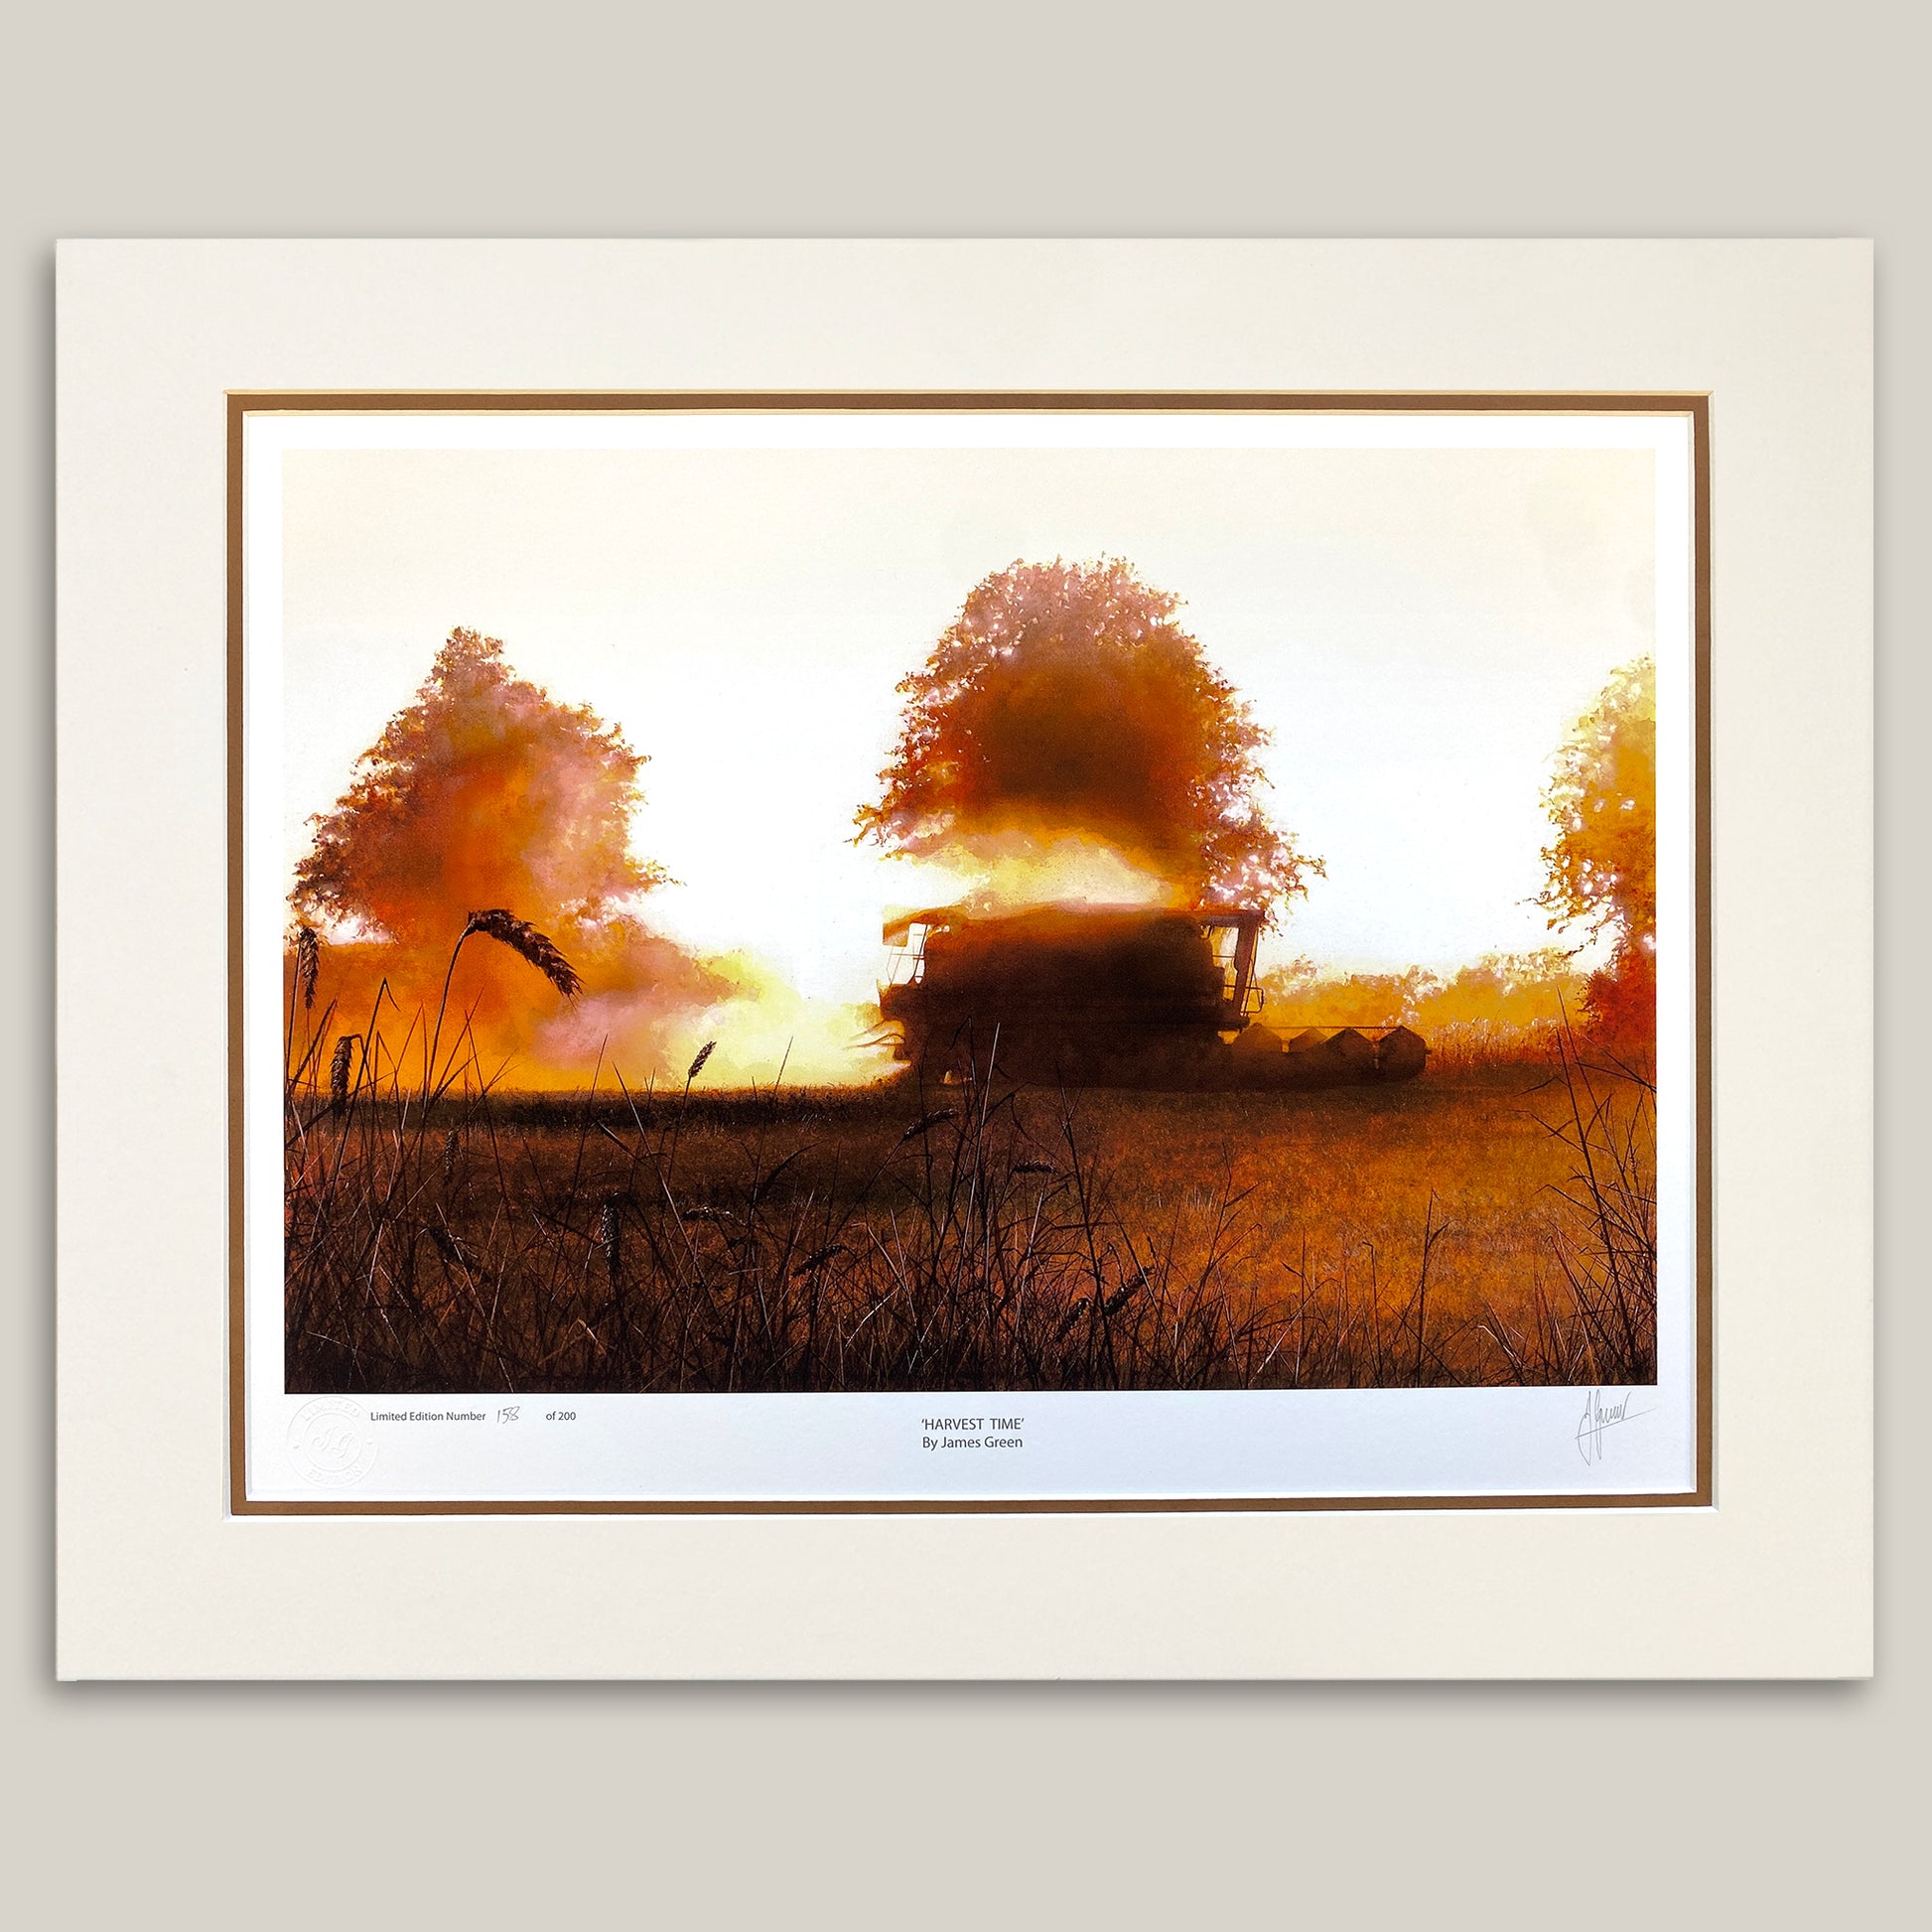 print of a combine harvester at sunset 